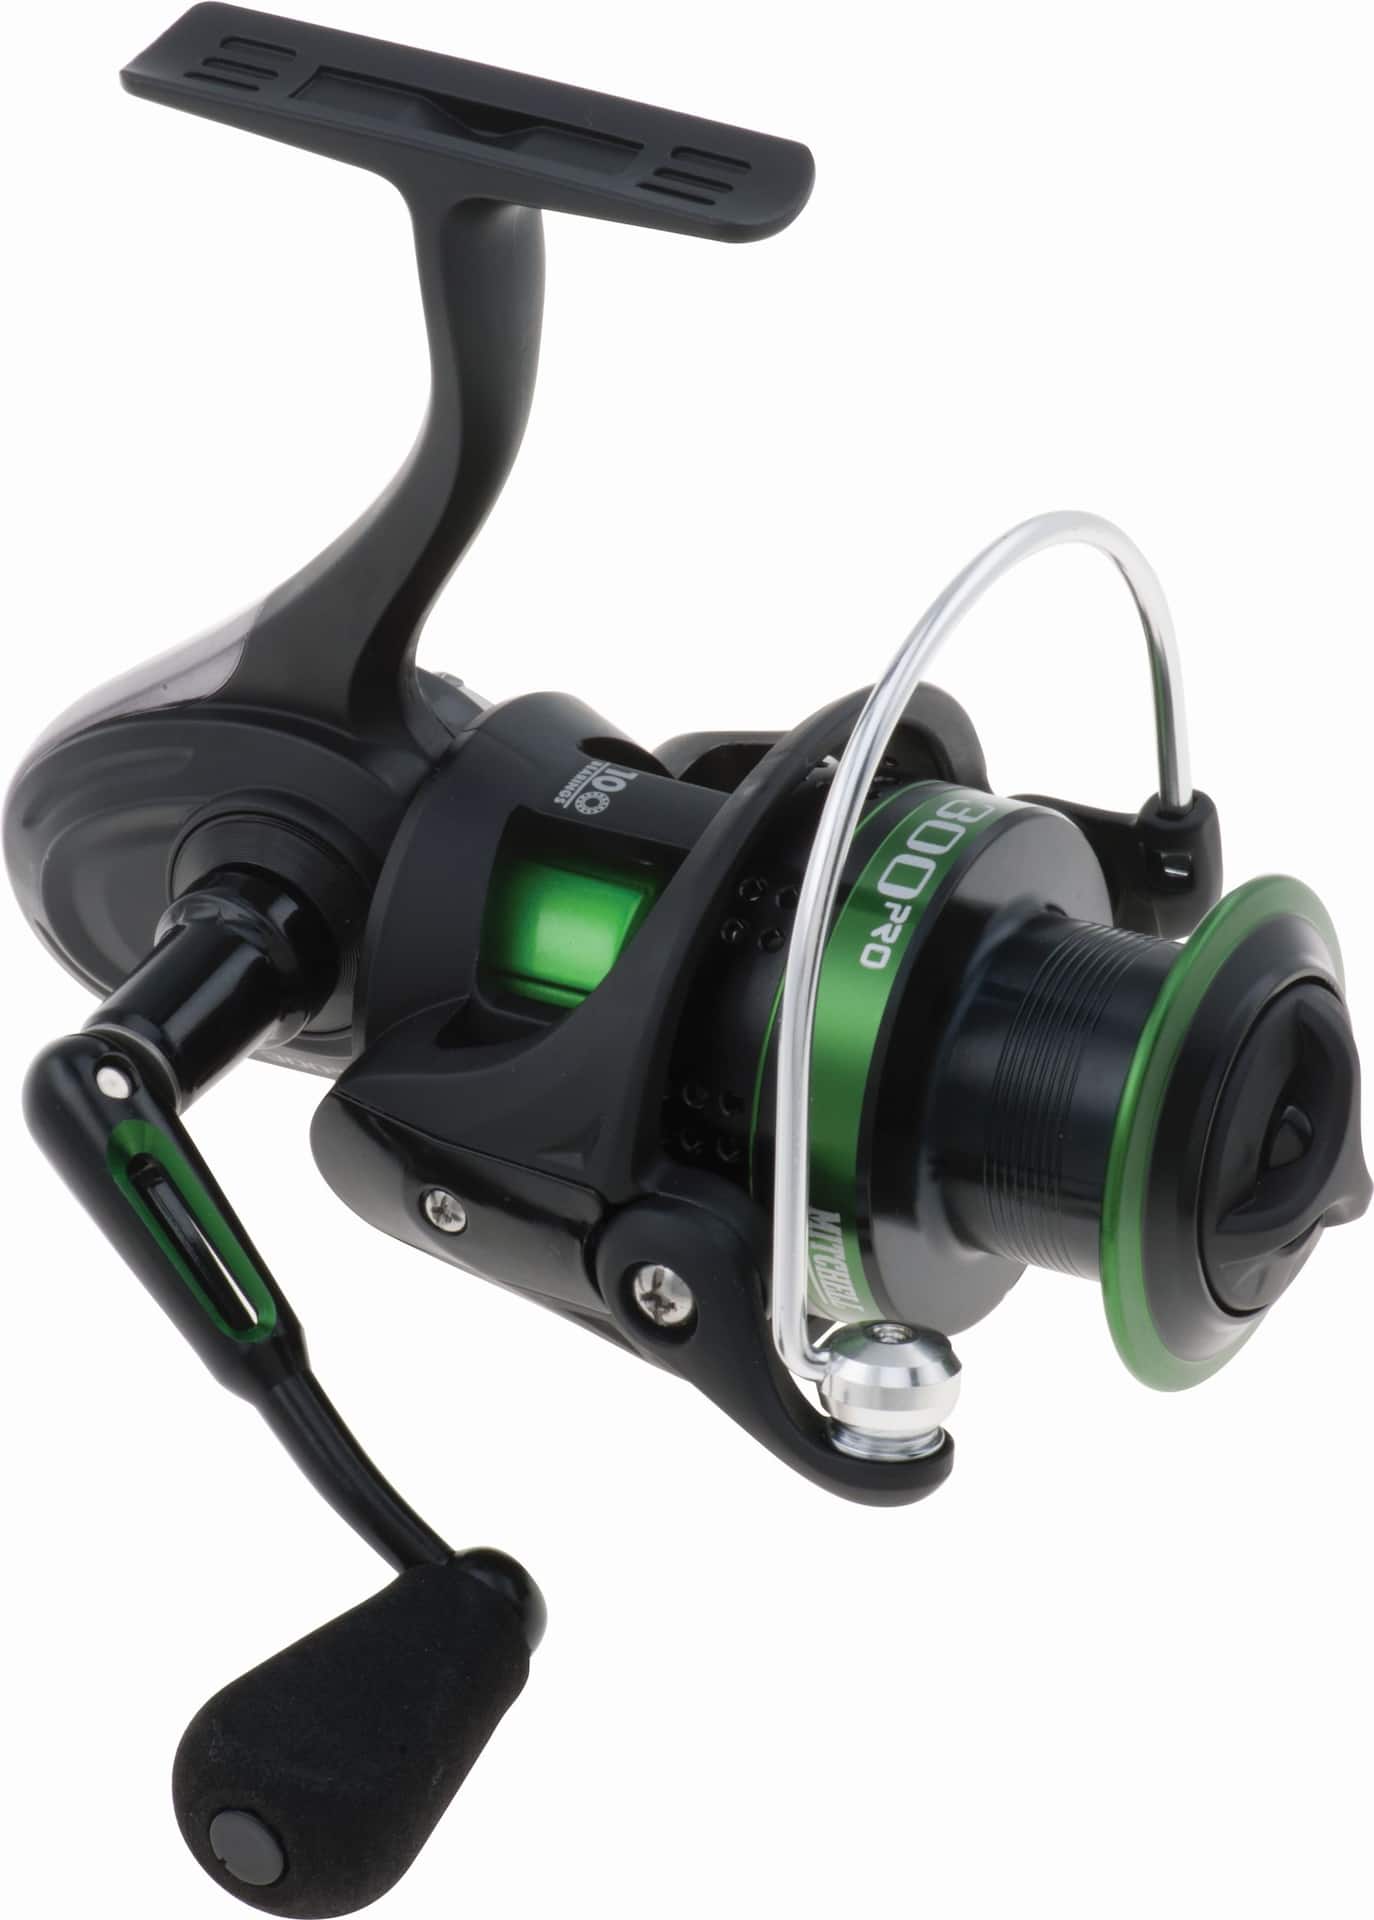 Mitchell 300 Pro Spinning Fishing Reel, Advanced Polymeric Body, Reversible